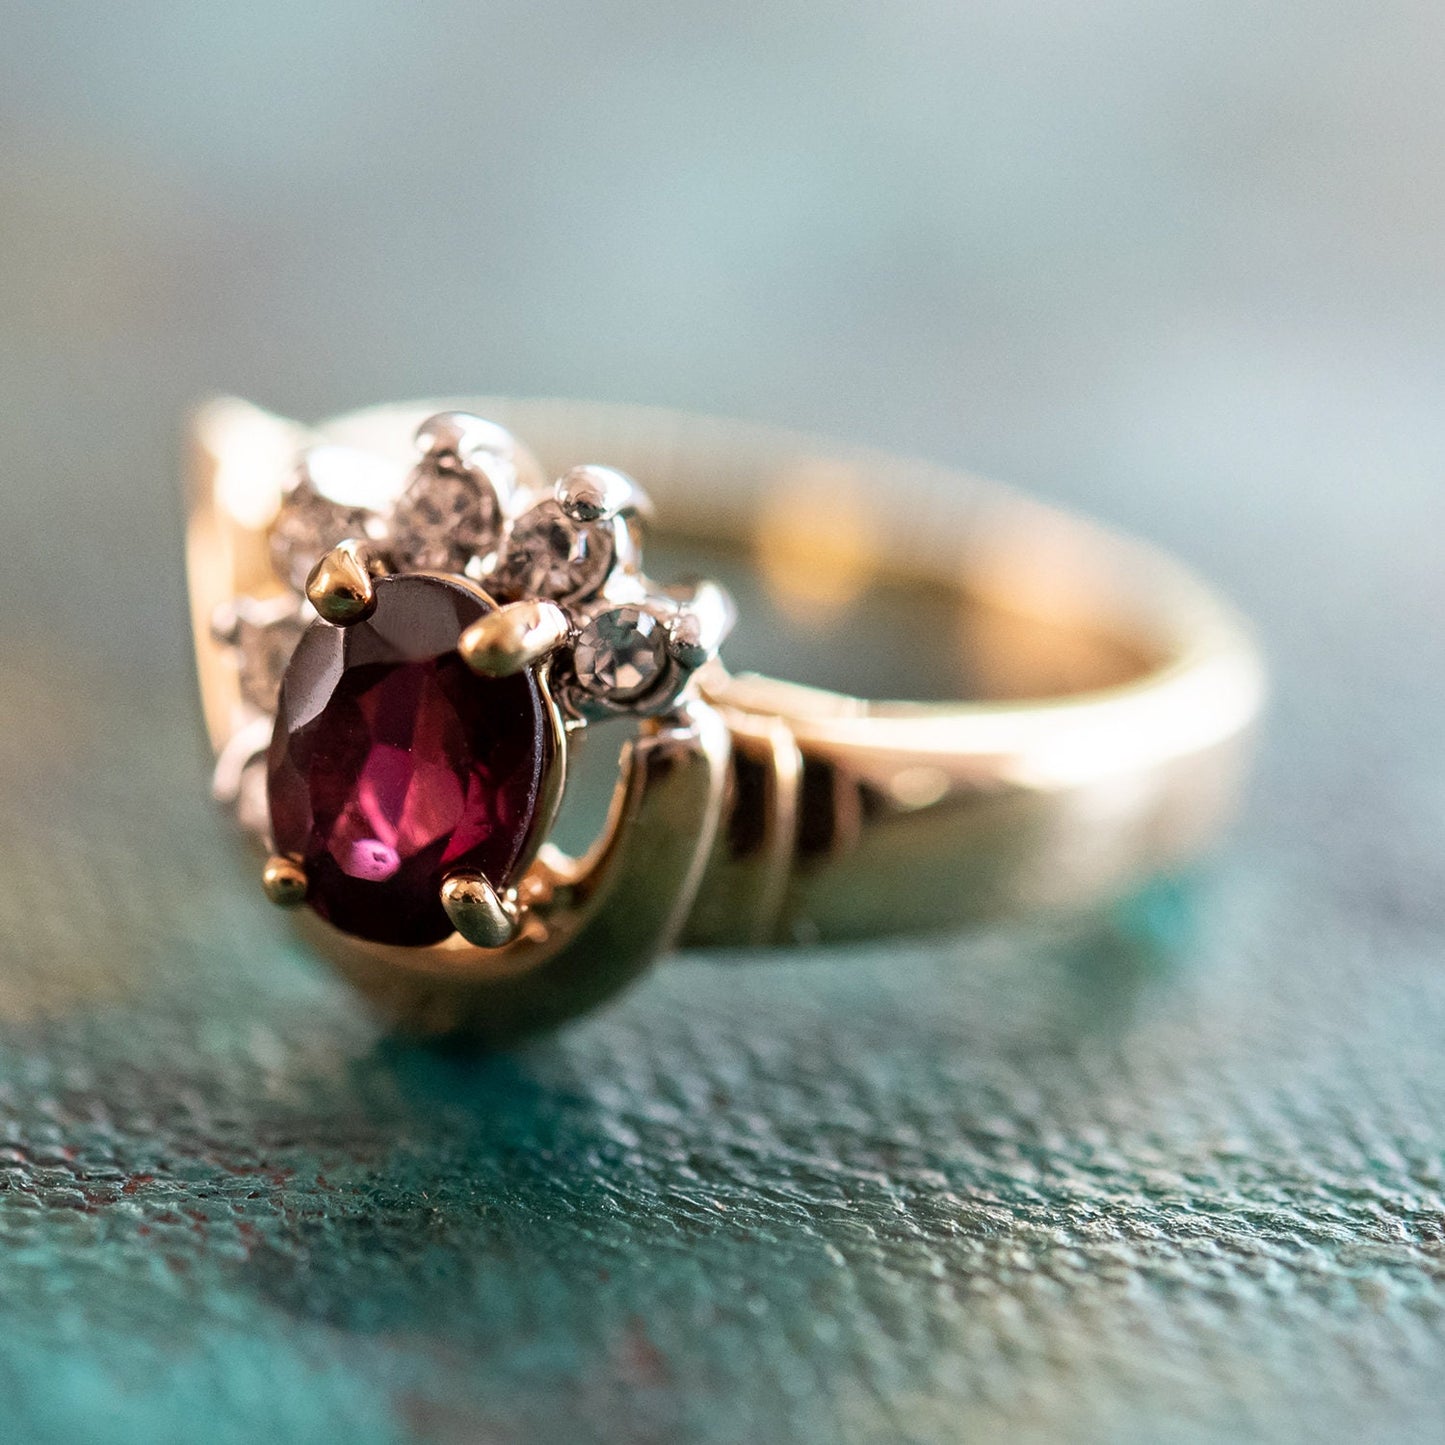 Vintage Ring Genuine Garnet and Clear Swarovski Crystals 18kt Gold Plated Size 7 only R2779 - Limited Stock - Never Worn